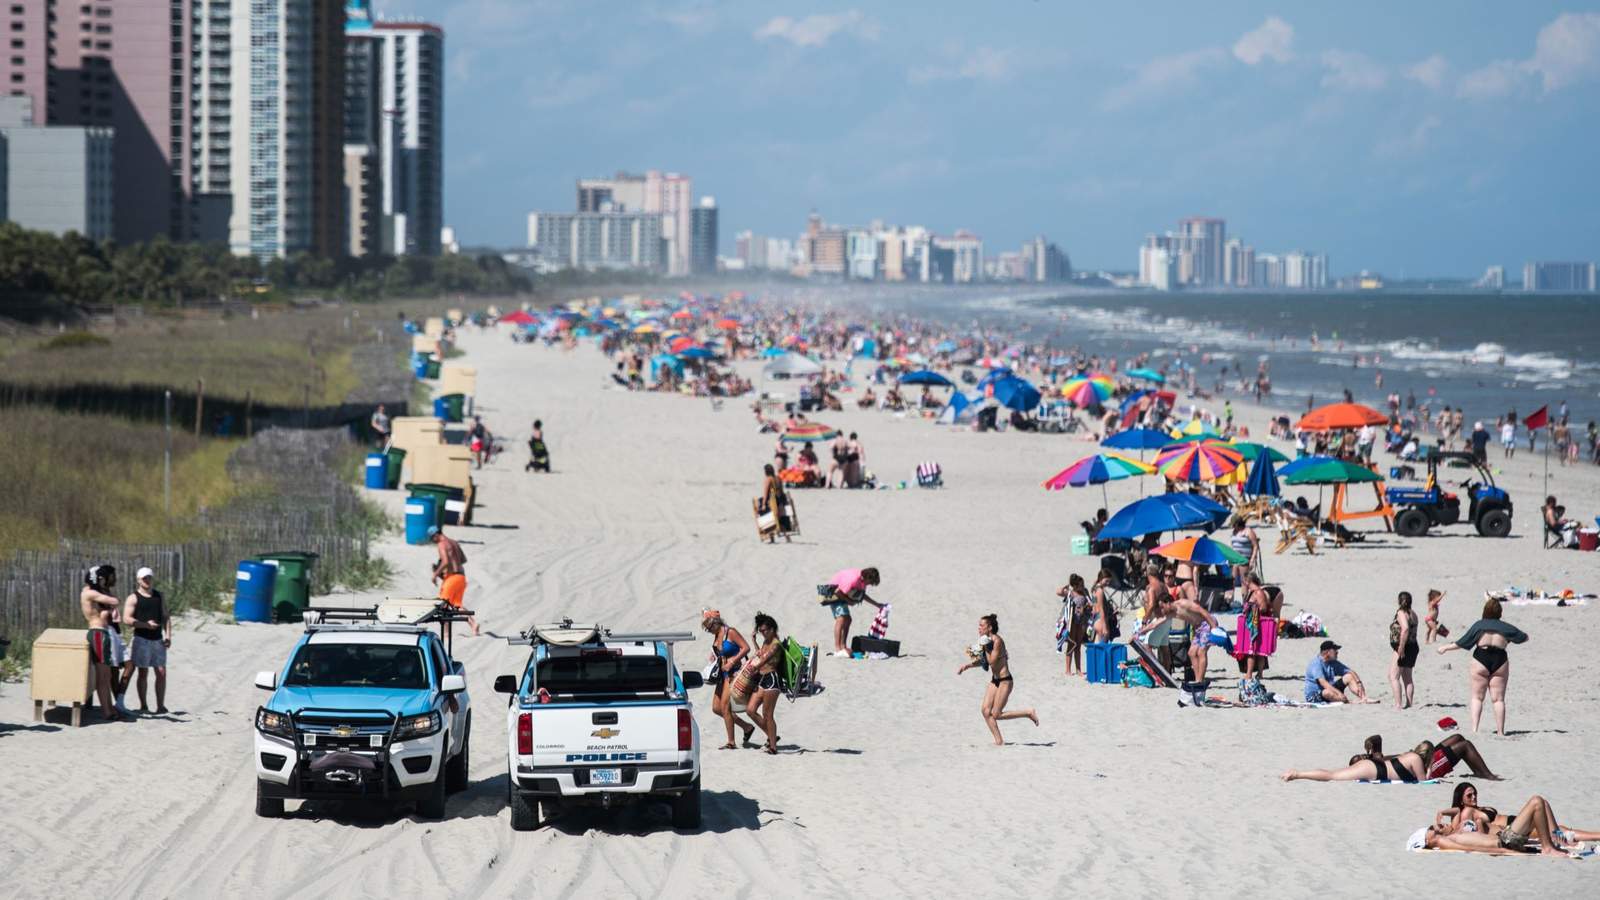 Returning from Myrtle Beach? VDH says you should quarantine for 14 days